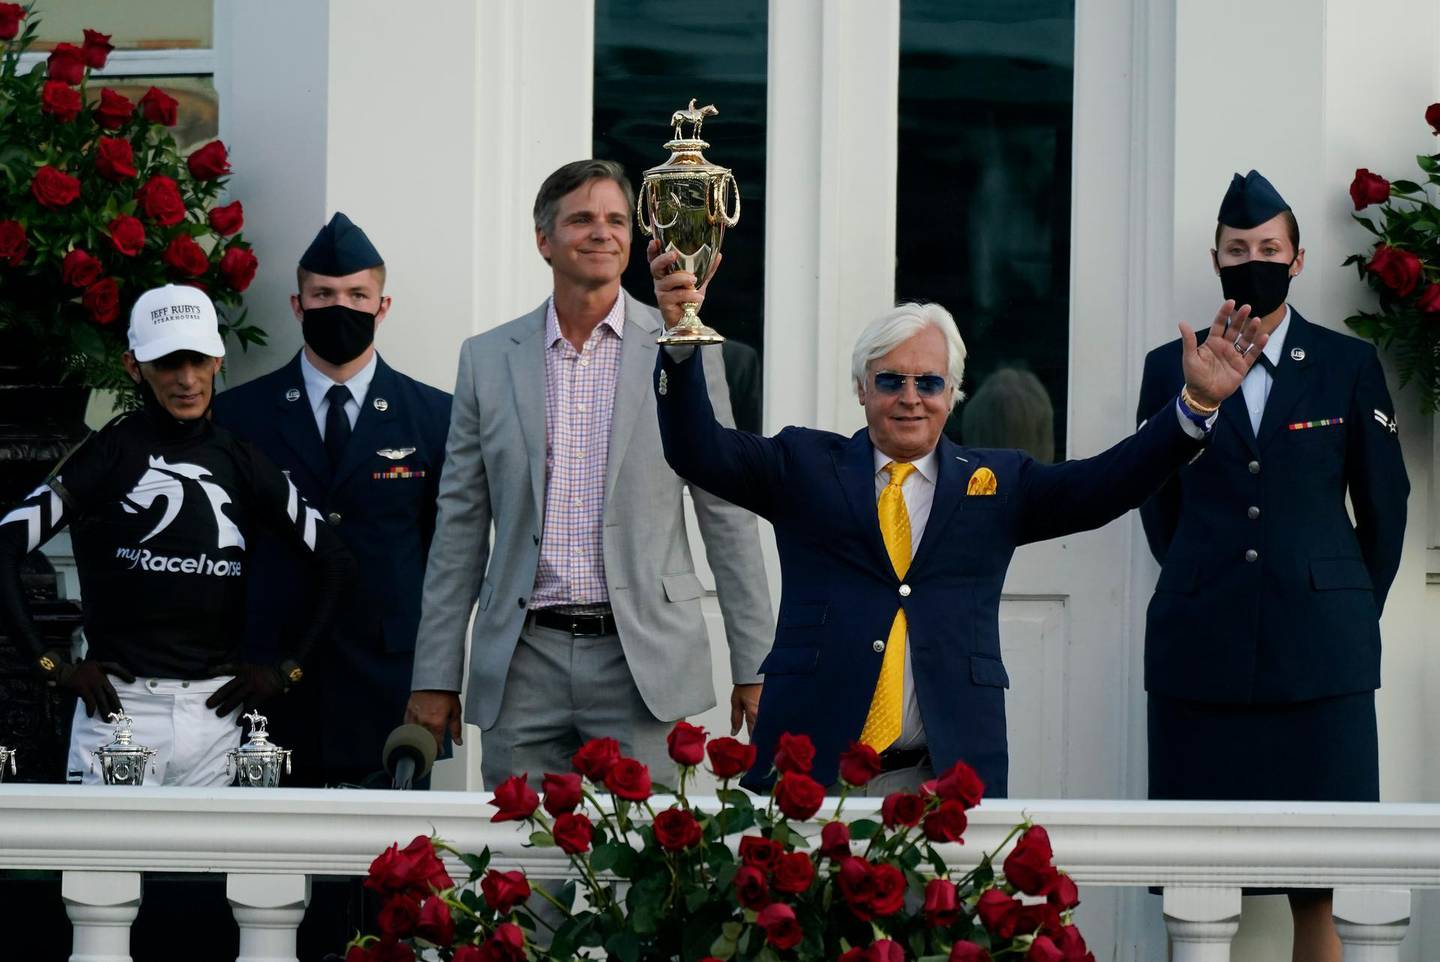 Trainer Bob Baffert holds the trophy after John Velazquez, left, rode Authentic to victory in the 146th running of the Kentucky Derby at Churchill Downs, Saturday, Sept. 5, 2020, in Louisville, Ky. (AP Photo/Jeff Roberson)